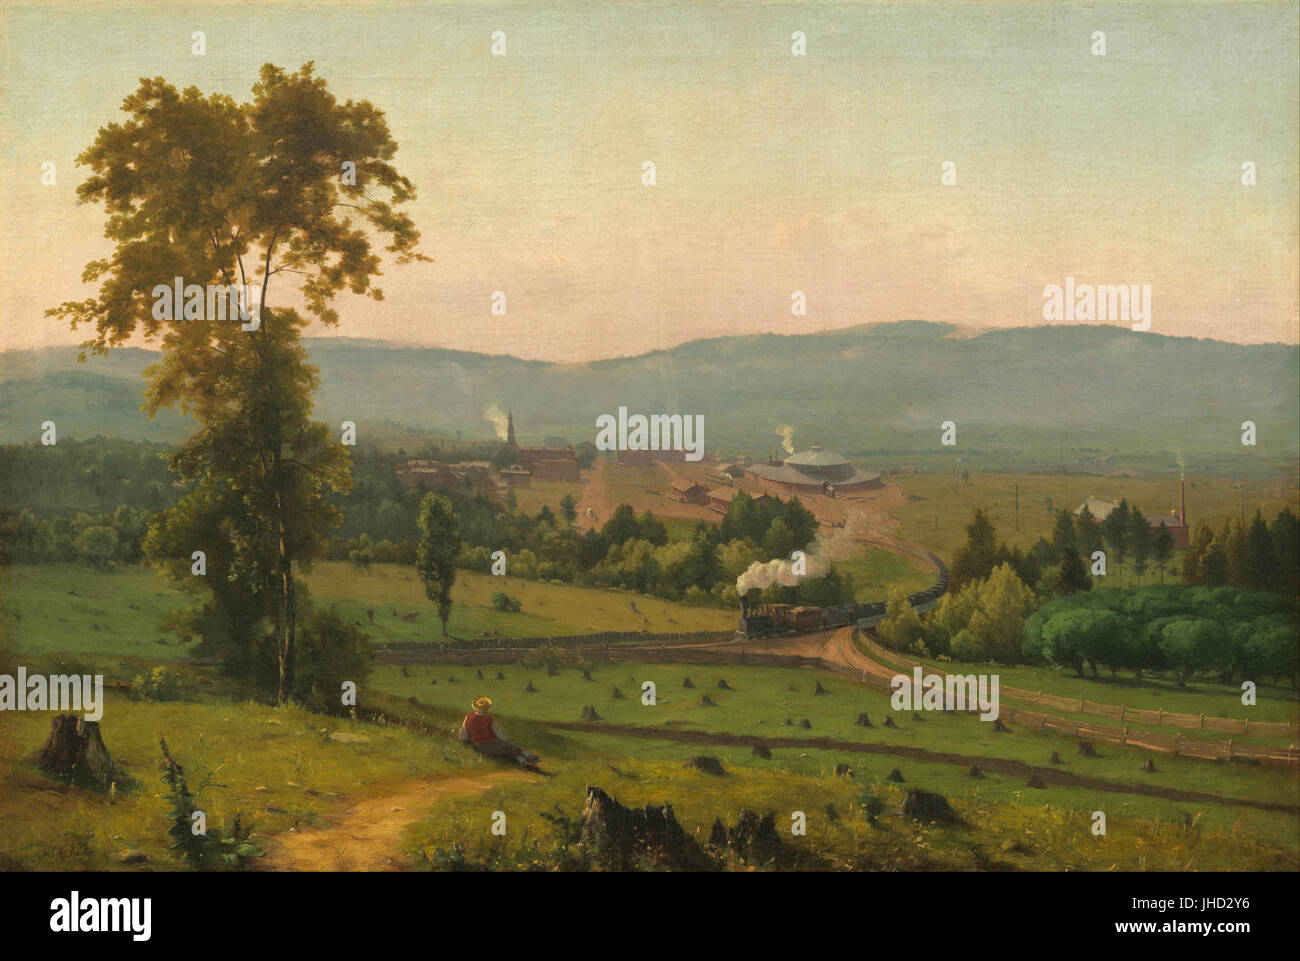 George Inness - The Lackawanna Valley - Stock Photo